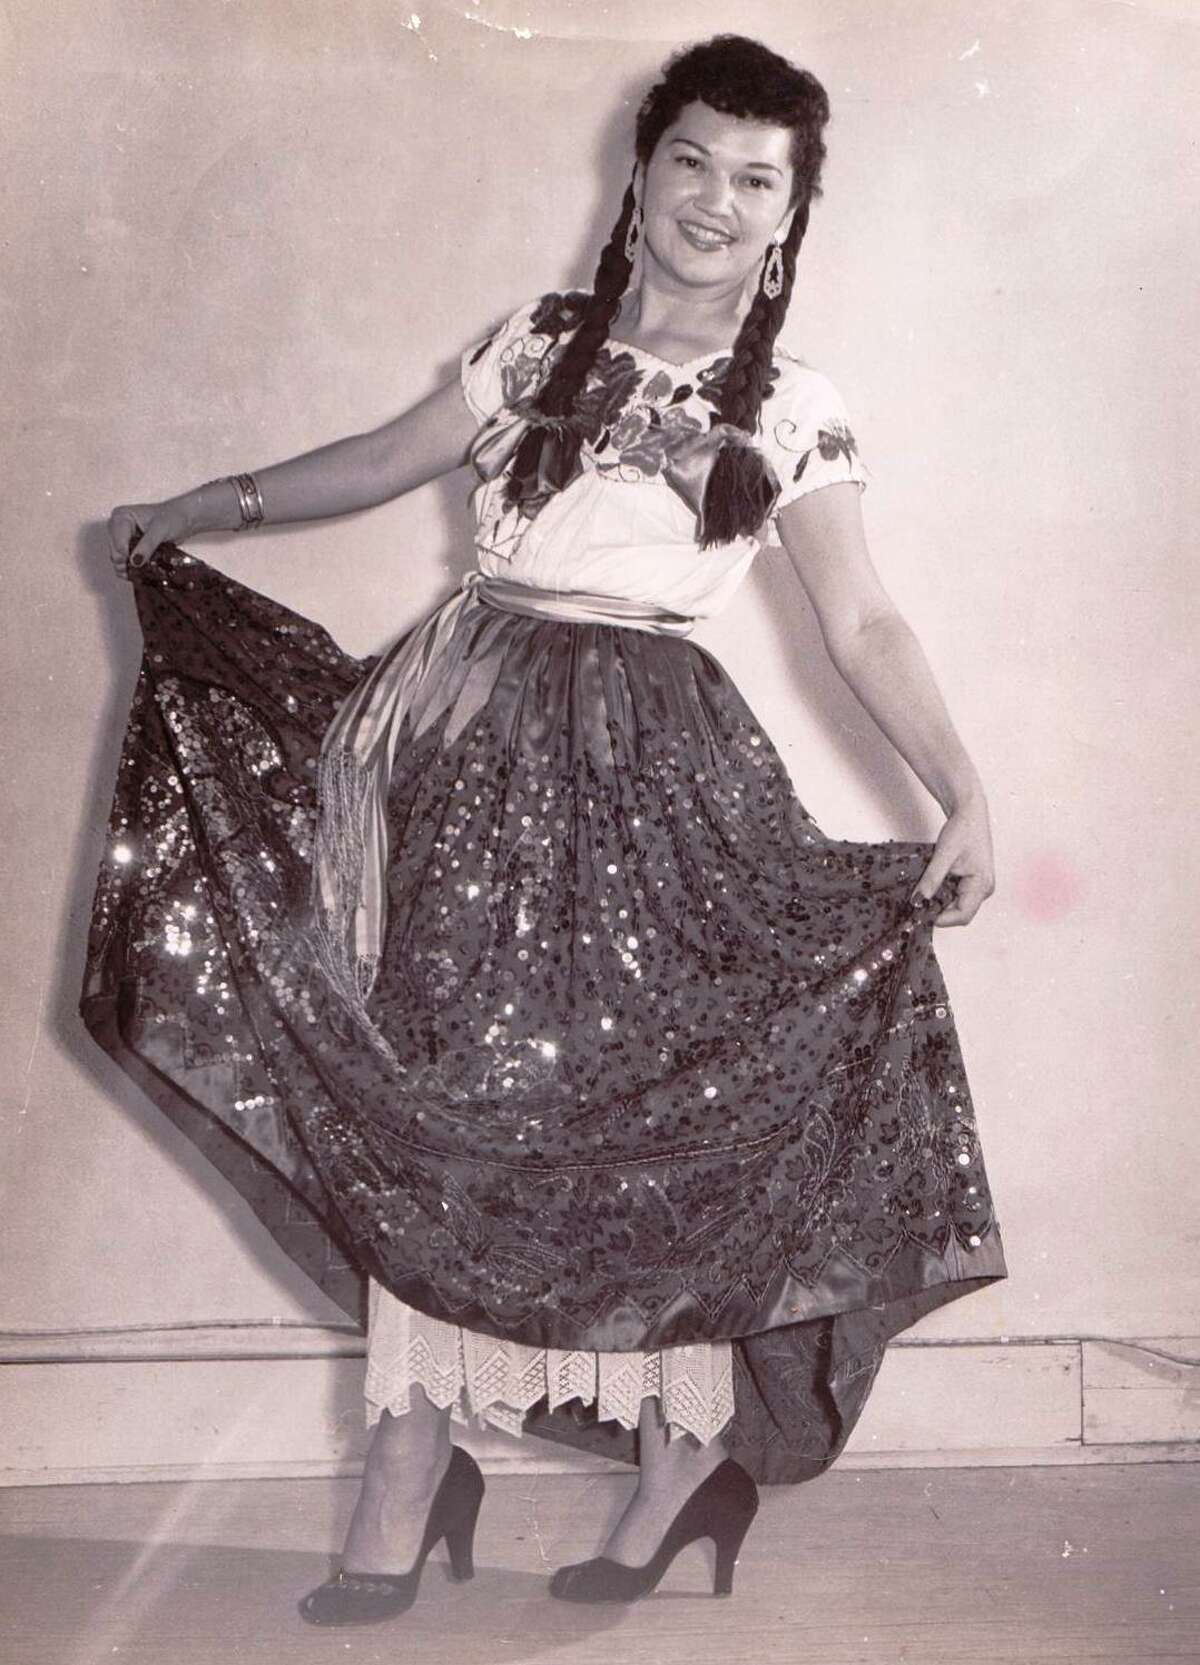 Nelda Drury posed for this photo in the 50s, which is when she founded the San Antonio Folk Dance Festival.